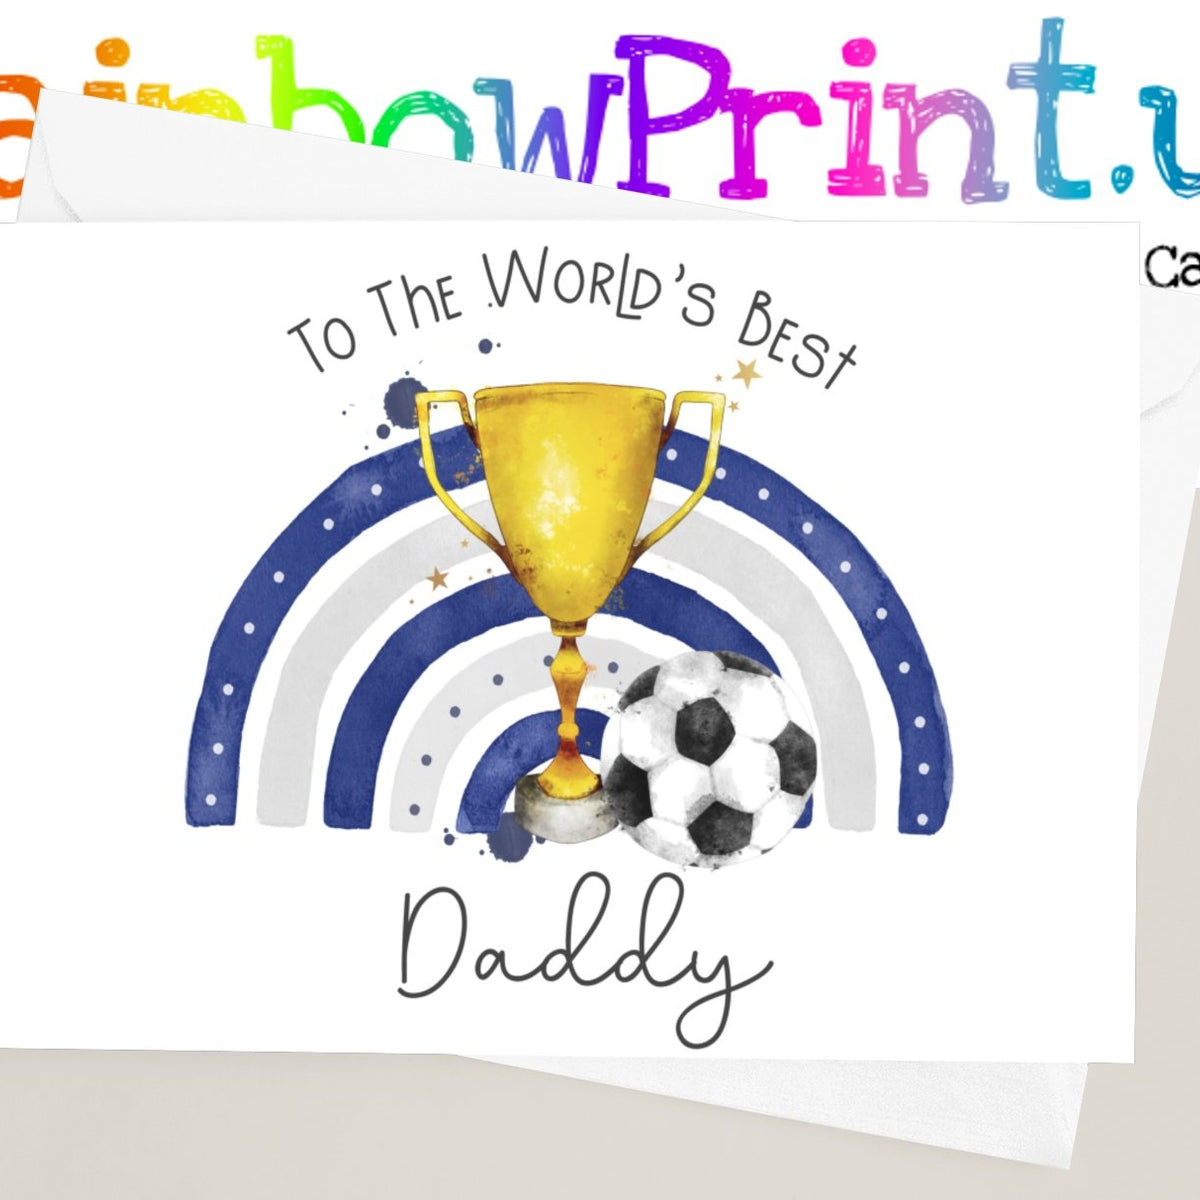 Football World's Best Daddy Blue and Grey - Personalised A5 Glossy Greetings Card - Rainbowprint.uk